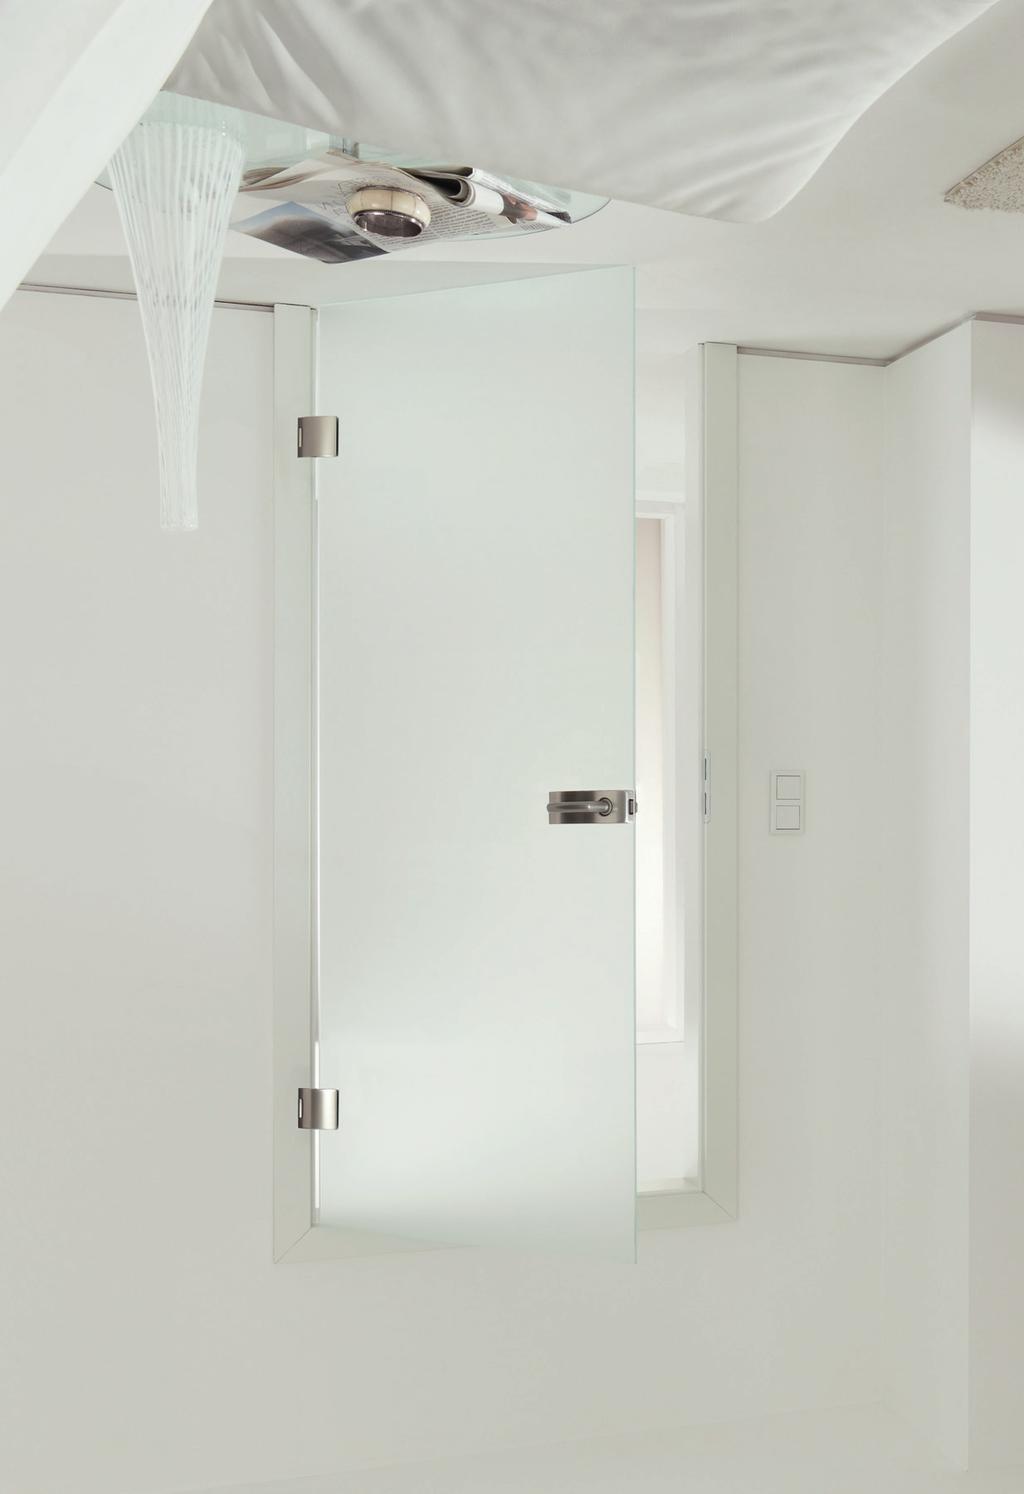 STUDIO Arcos Manual single action and double action door systems Technical data Glass Glass thickness max door weight Lock application Applications Material Finishes Toughened safety glass 8,10 mm 45